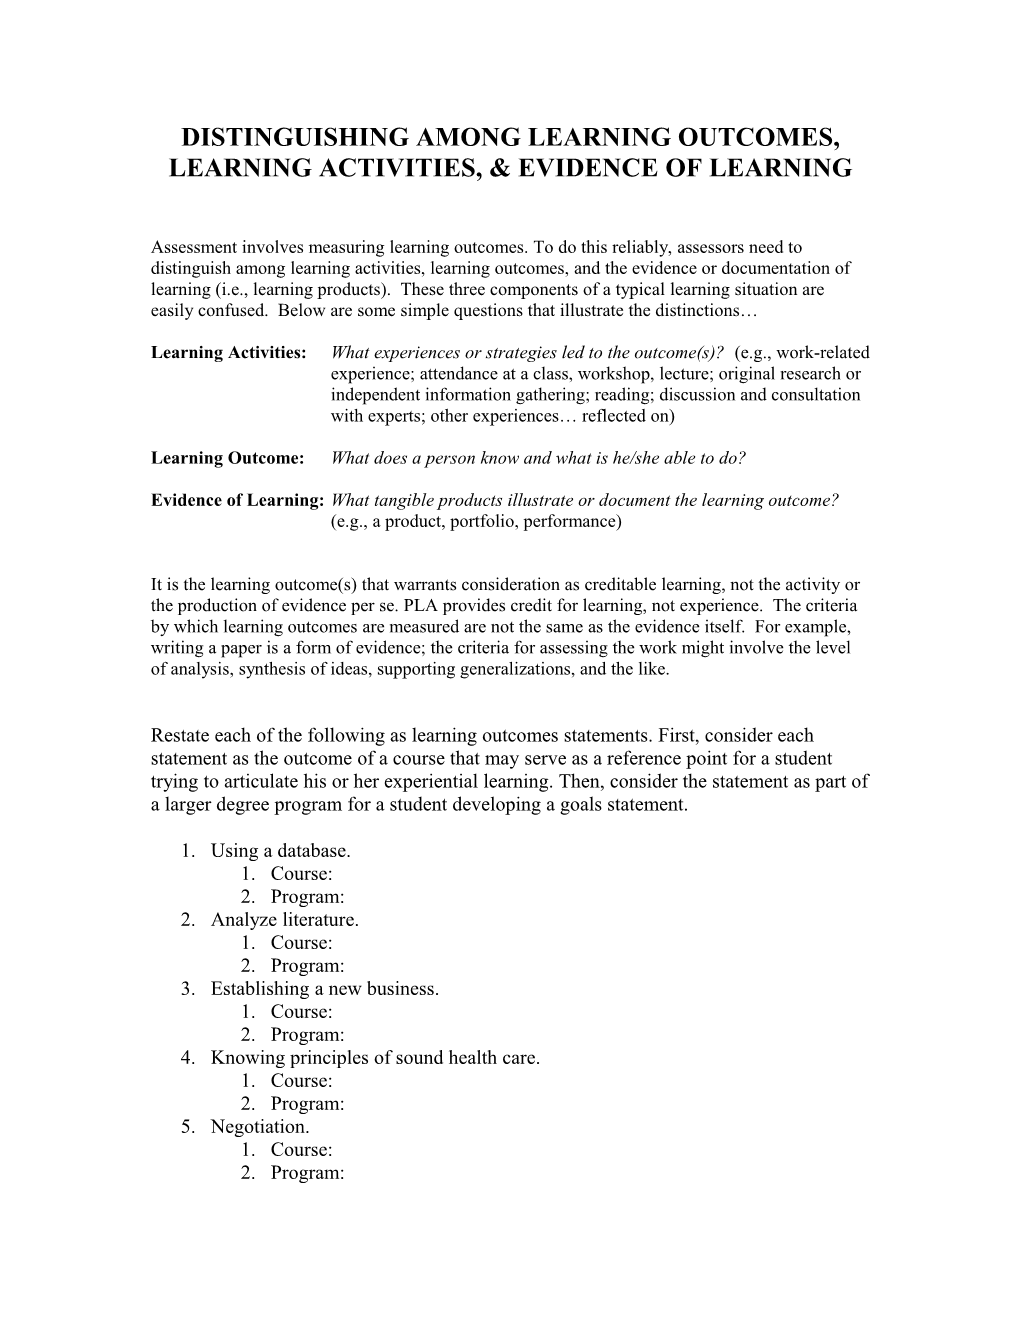 Writing Statements of Learning Outcomes